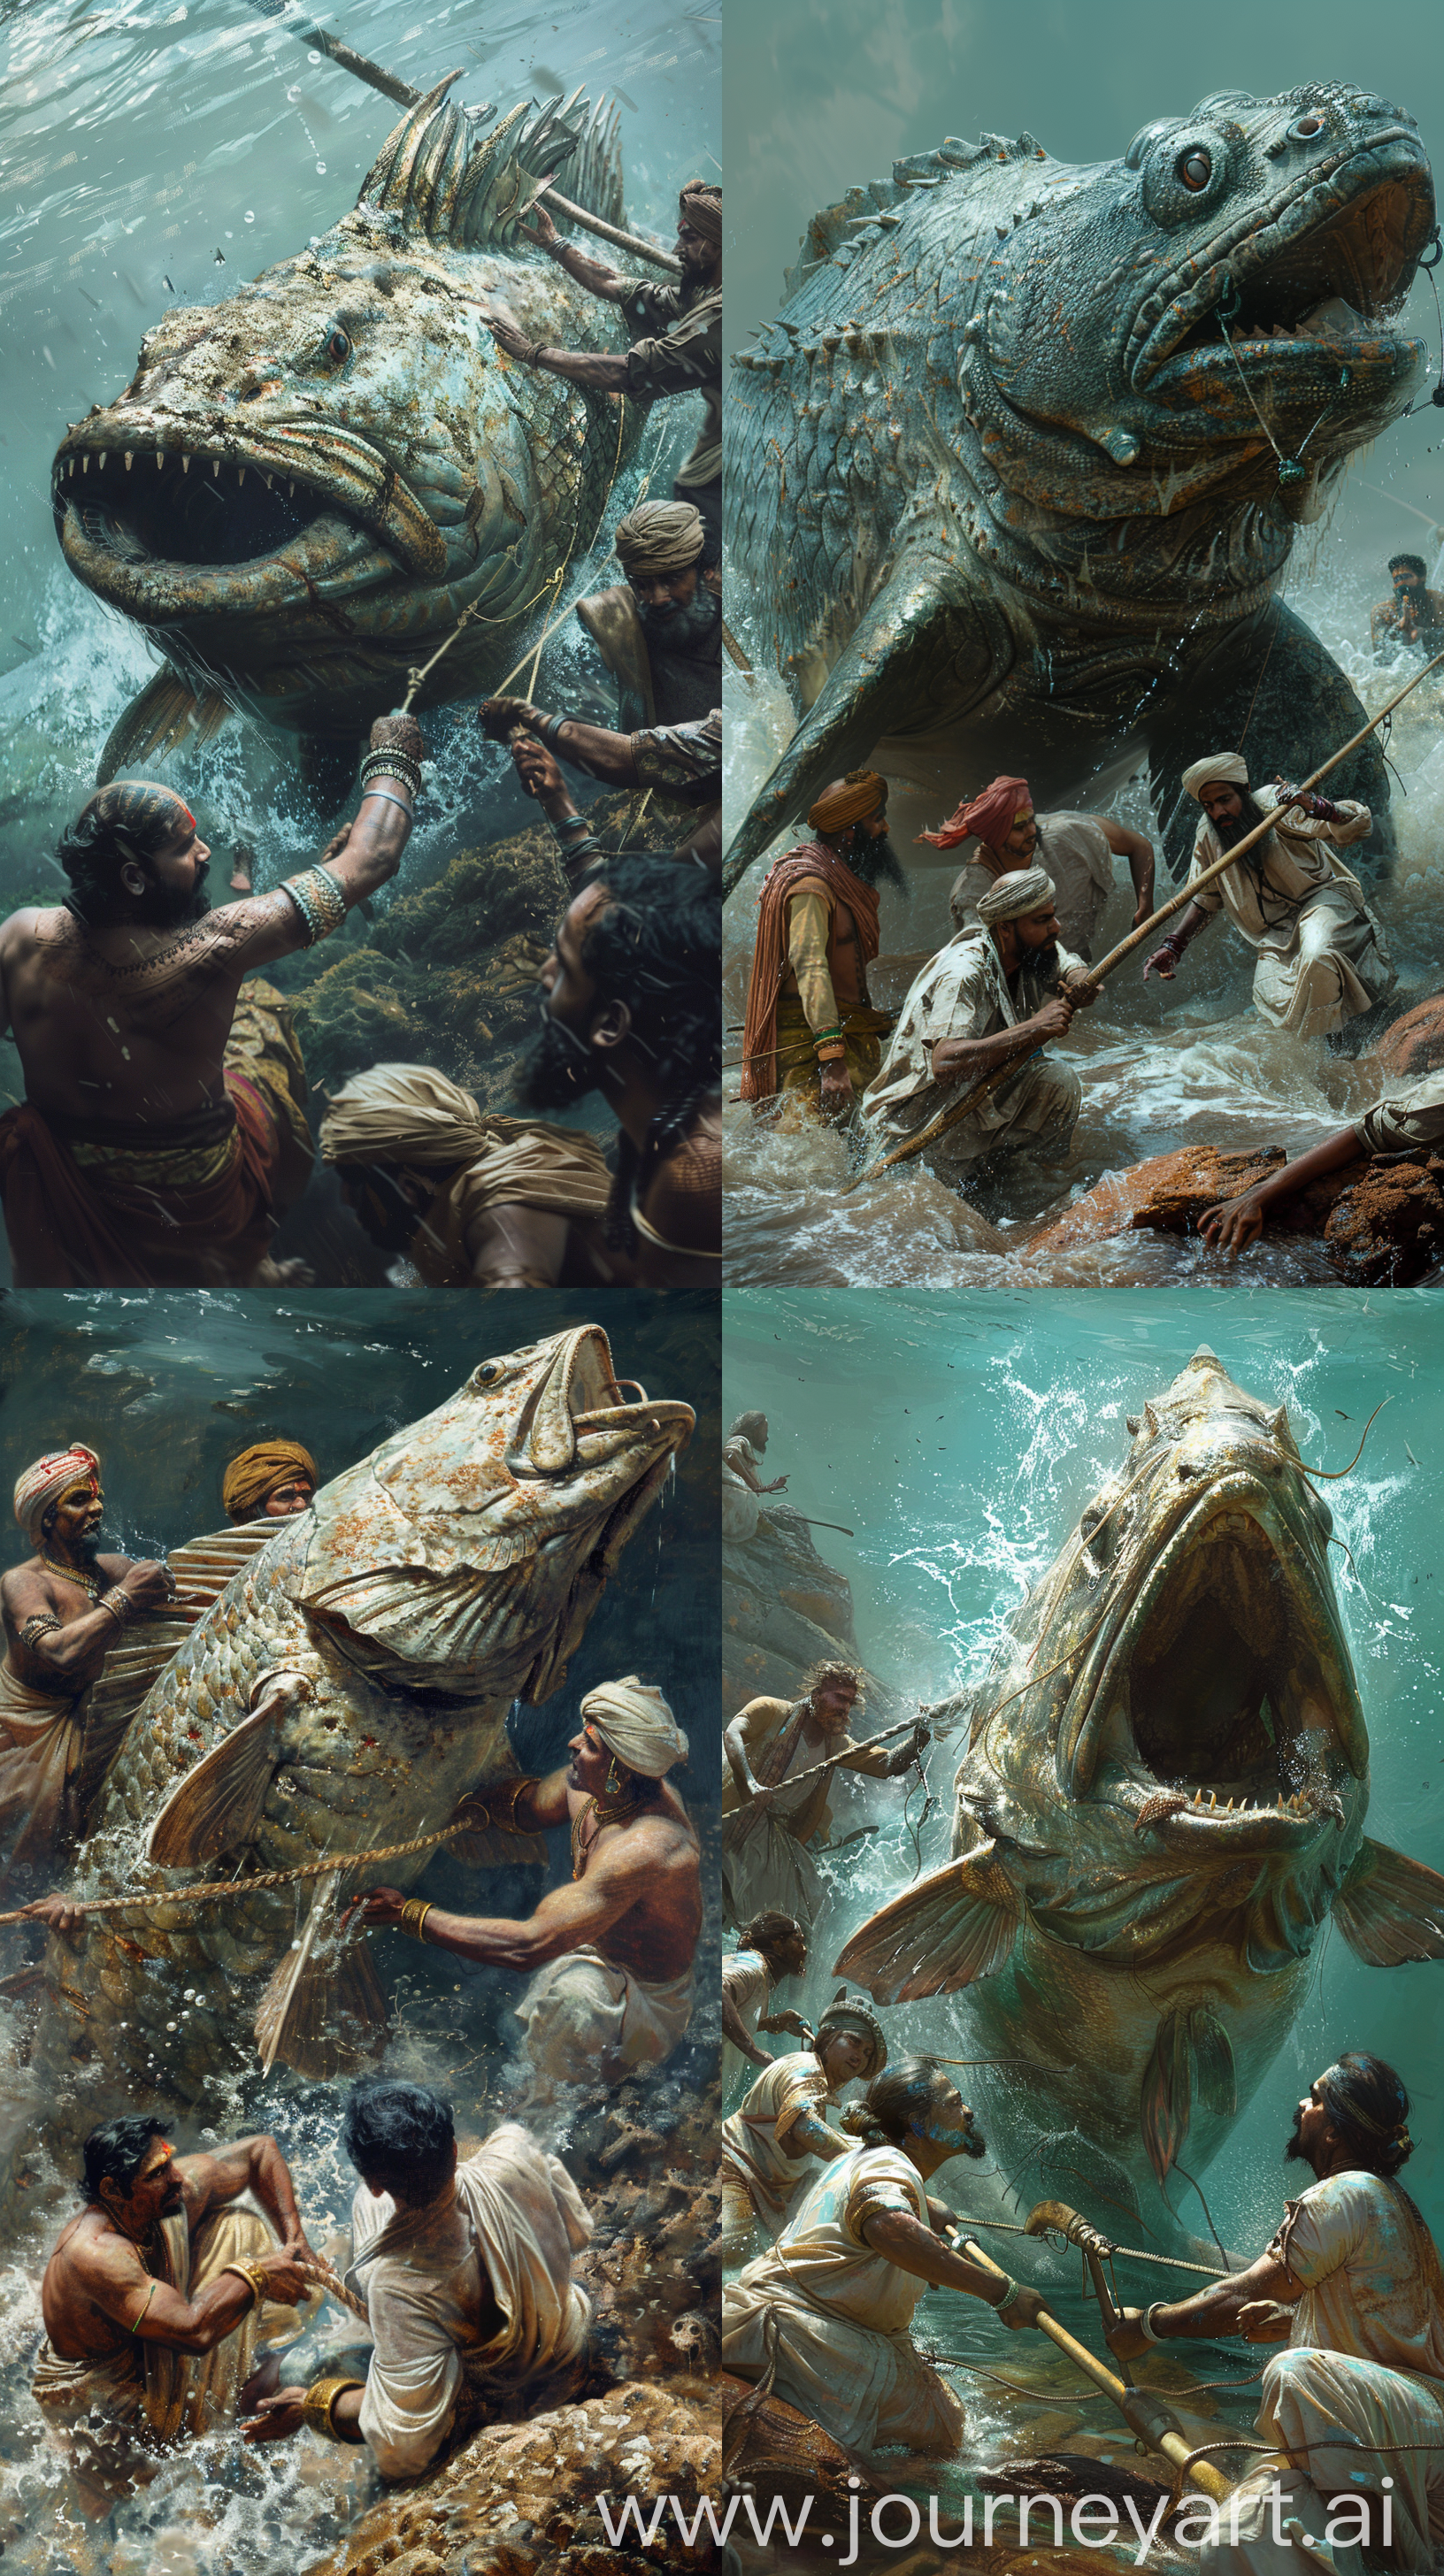 A group of Indian fishermen from ancient Indian times hauling a big fish like creature with the head of a lizard from the sea, intricate details, 8k quality image --s 200 --ar 9:16 --v 6